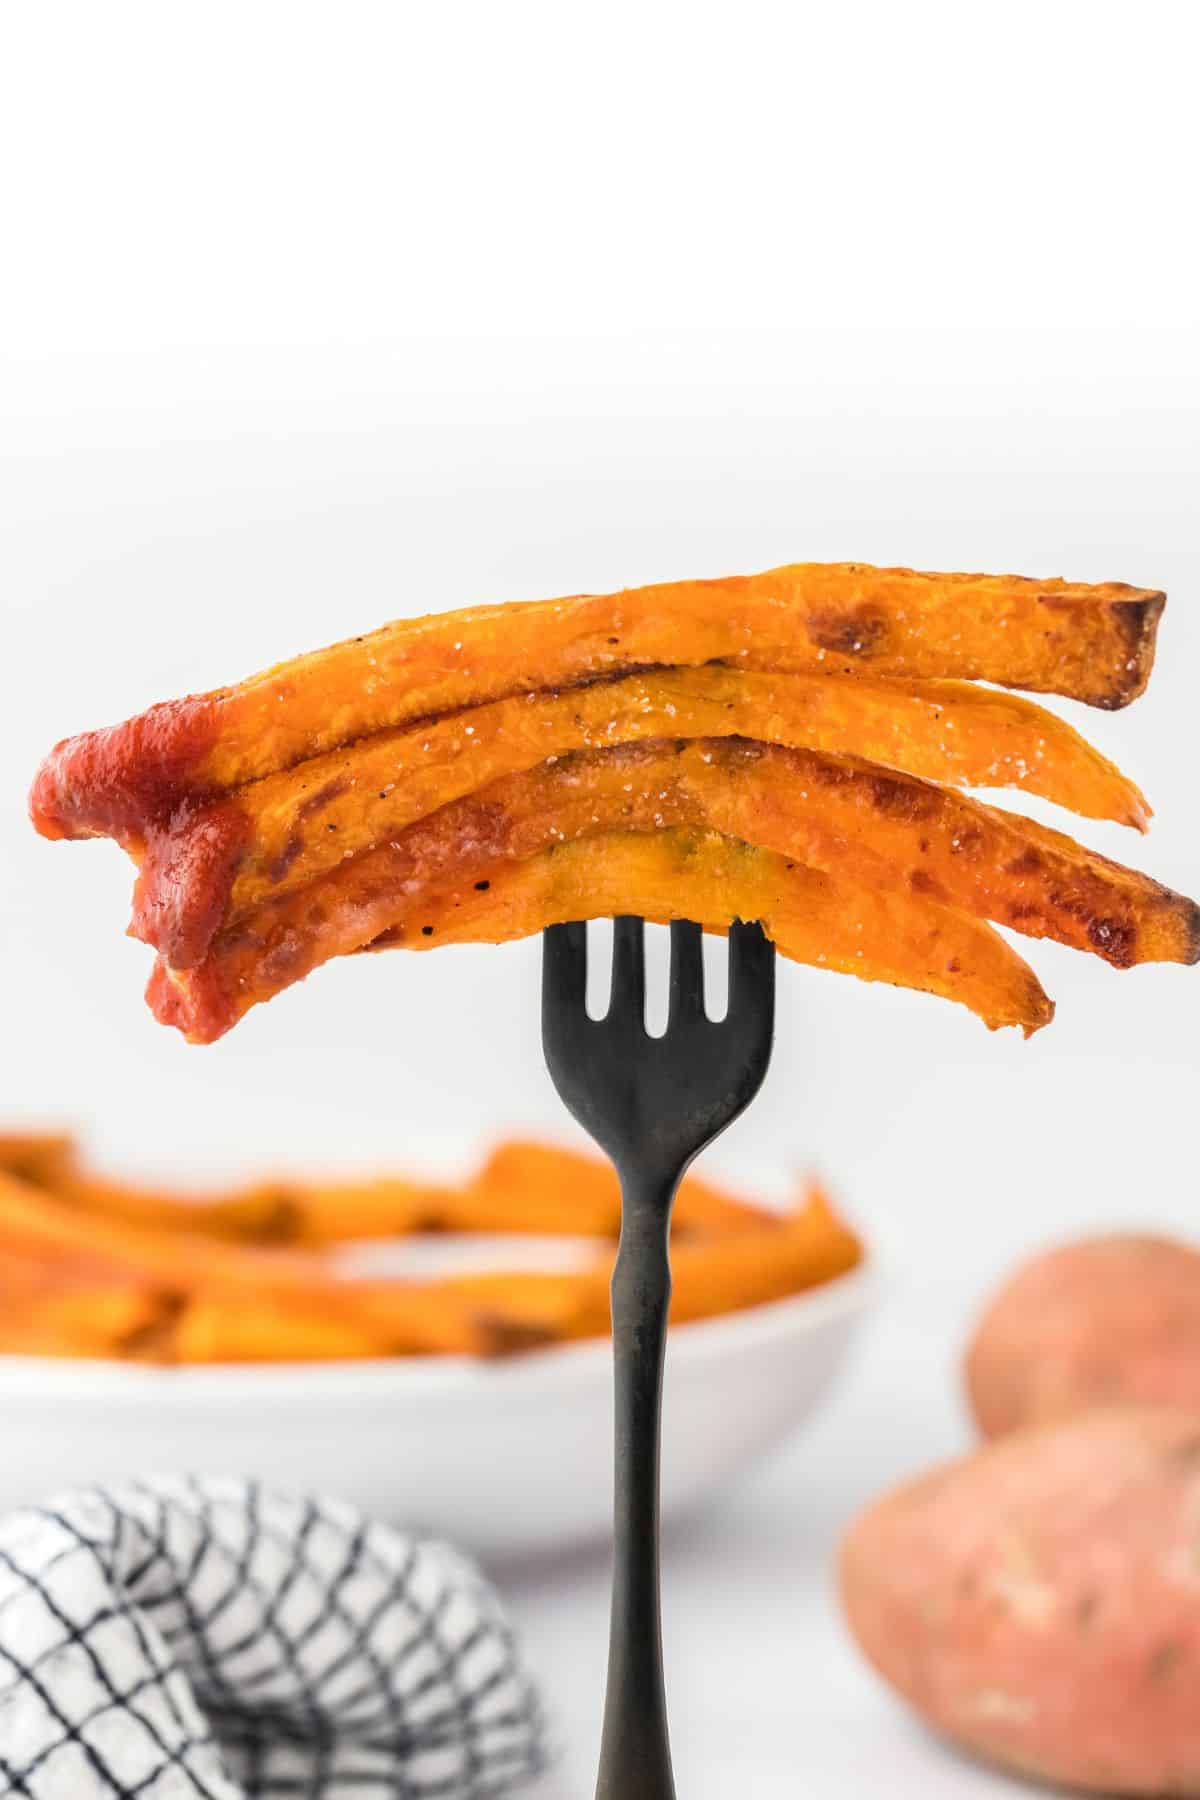 A fork held up in front of the table with four sweet potato fries on a fork in front of a bowl of more potatoes in the back.